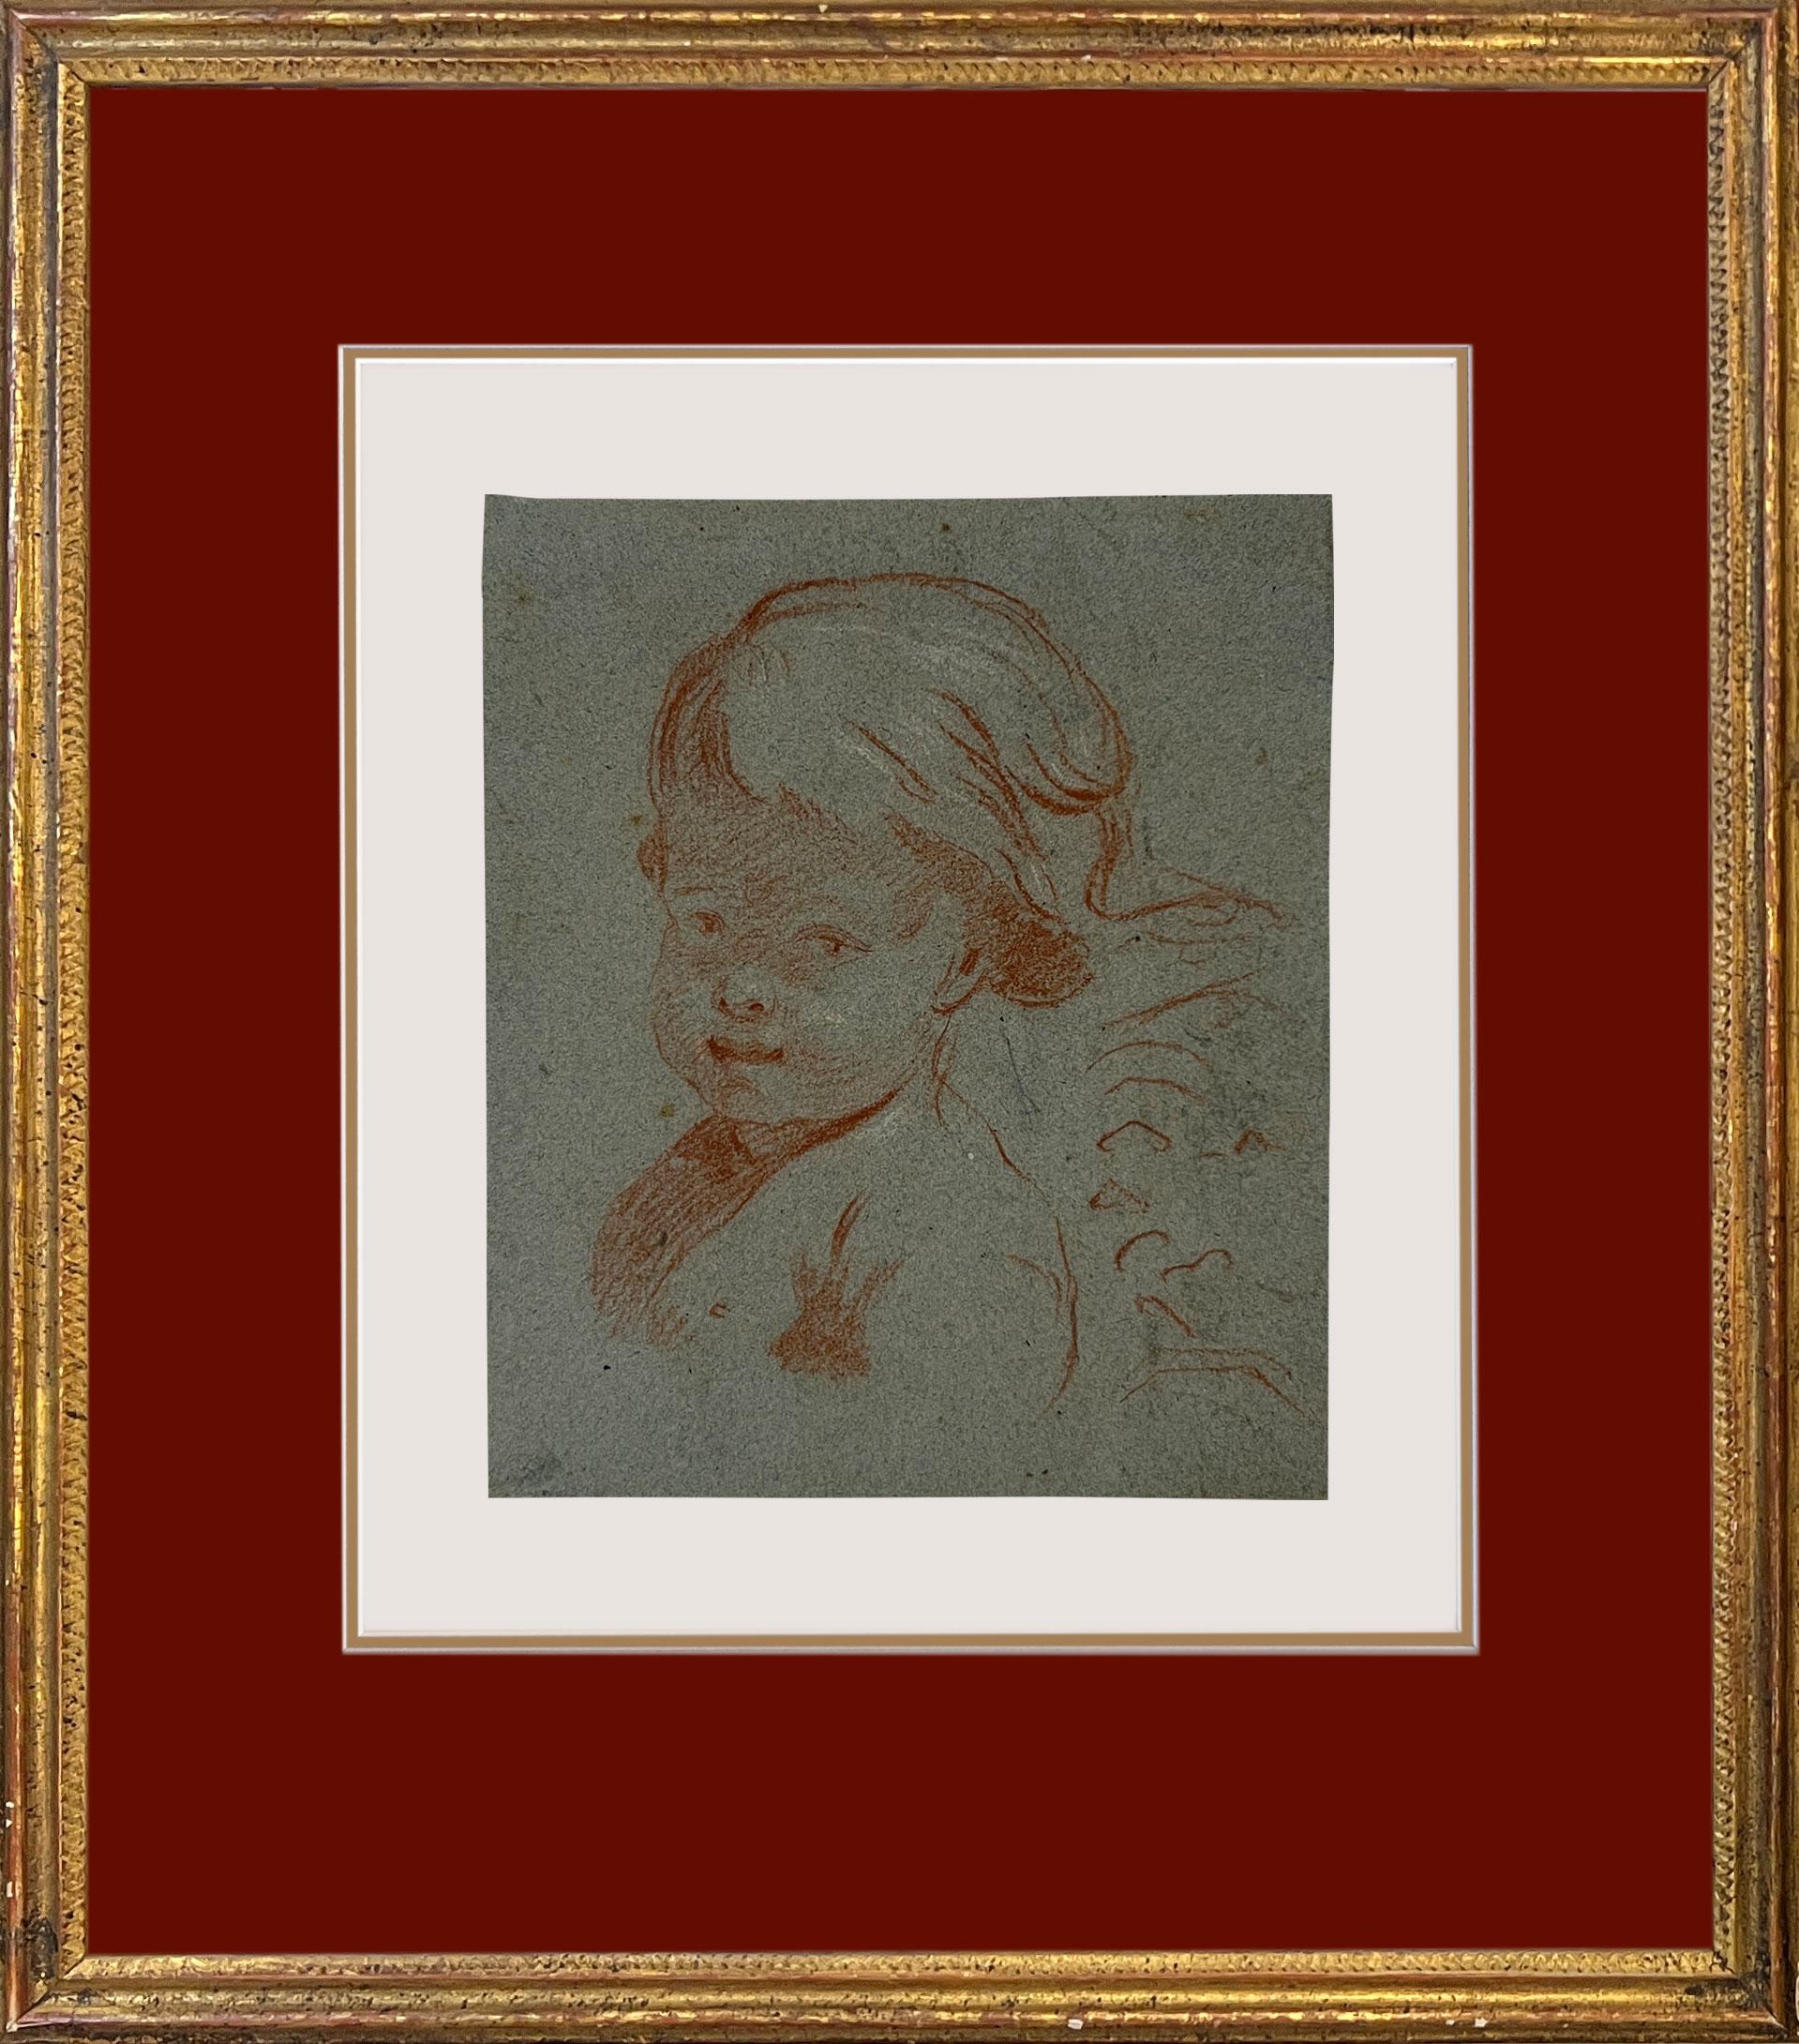 Circle of François Boucher (French 1703 - 1770), Study of a Child.
This charming work is probably a study for a painting, it shows a child with a swathe of billowing fabric over her head and back. This is a composition that Boucher used in